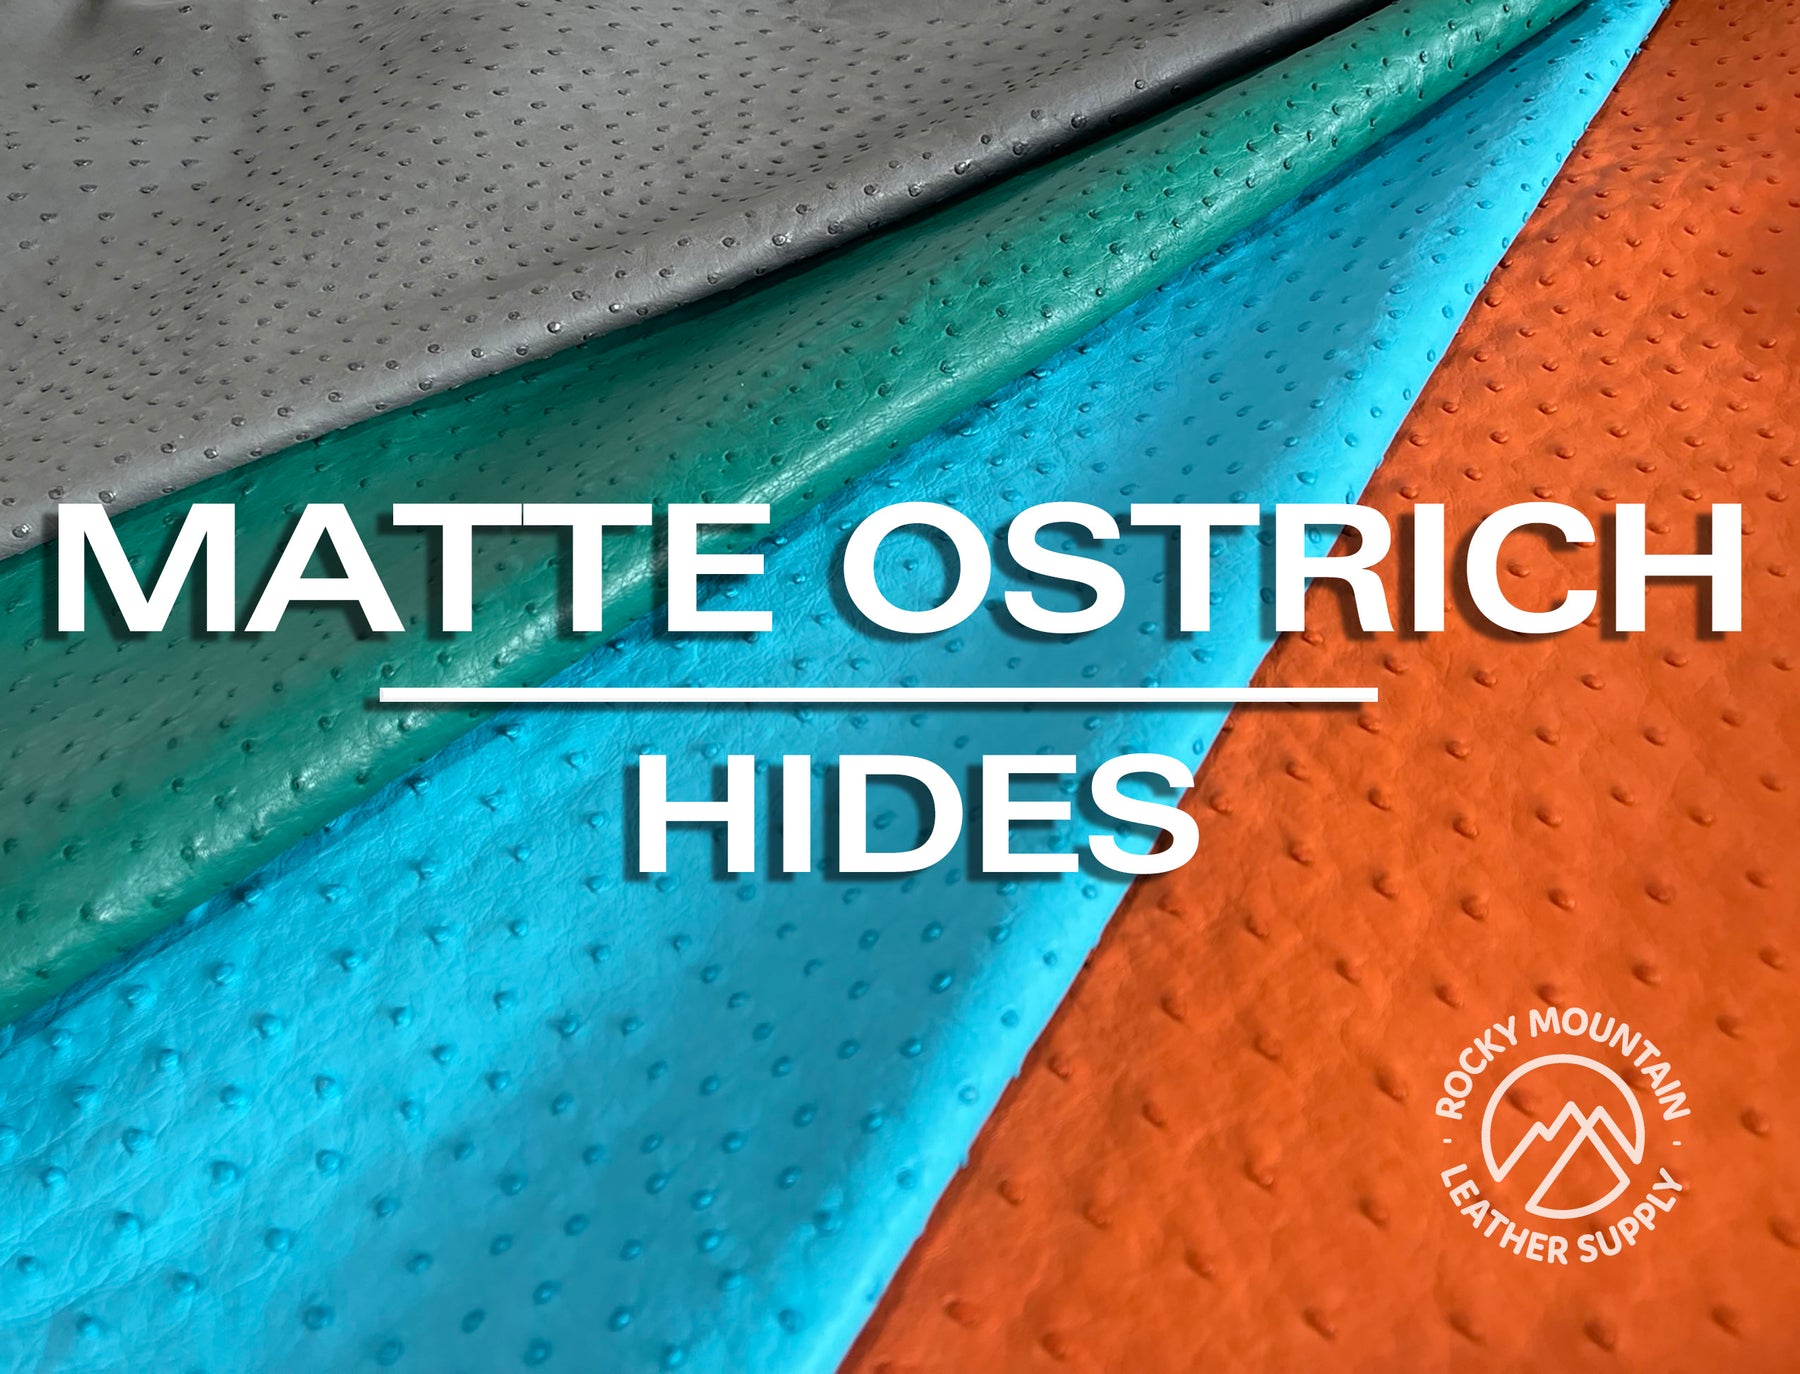 Ostrich Leather - An Exotic Option with a Unique Pattern